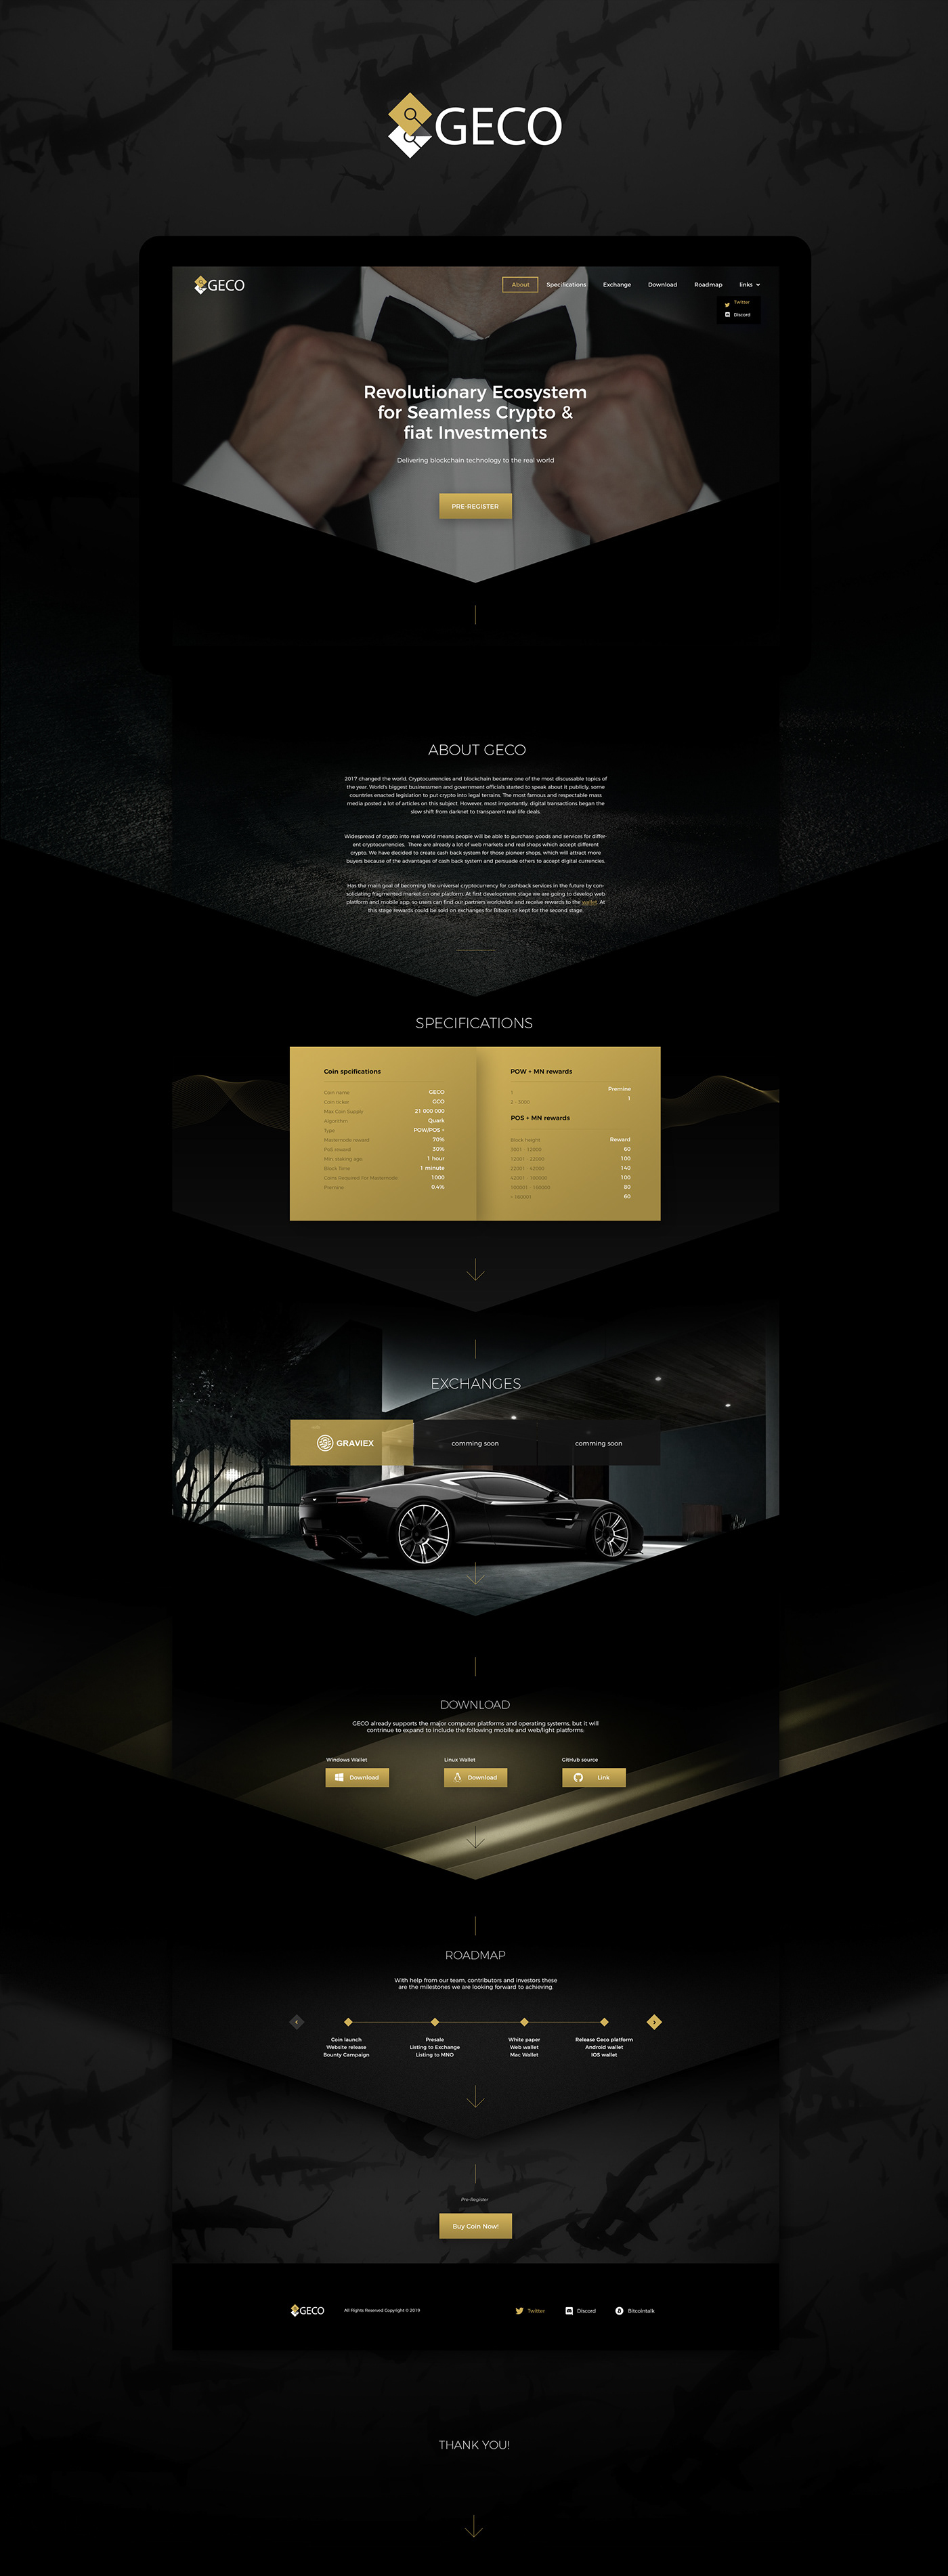 landing page landing page design Web Design  web site crypto Crypto design coin crypto coins Ico blockchain Web landing Technology Investment currency exchange download Platform ecosystem Startup cryptocurrency finance trade creative crypto trade btc UI ux mobile Adaptive token dark luxury gold rich